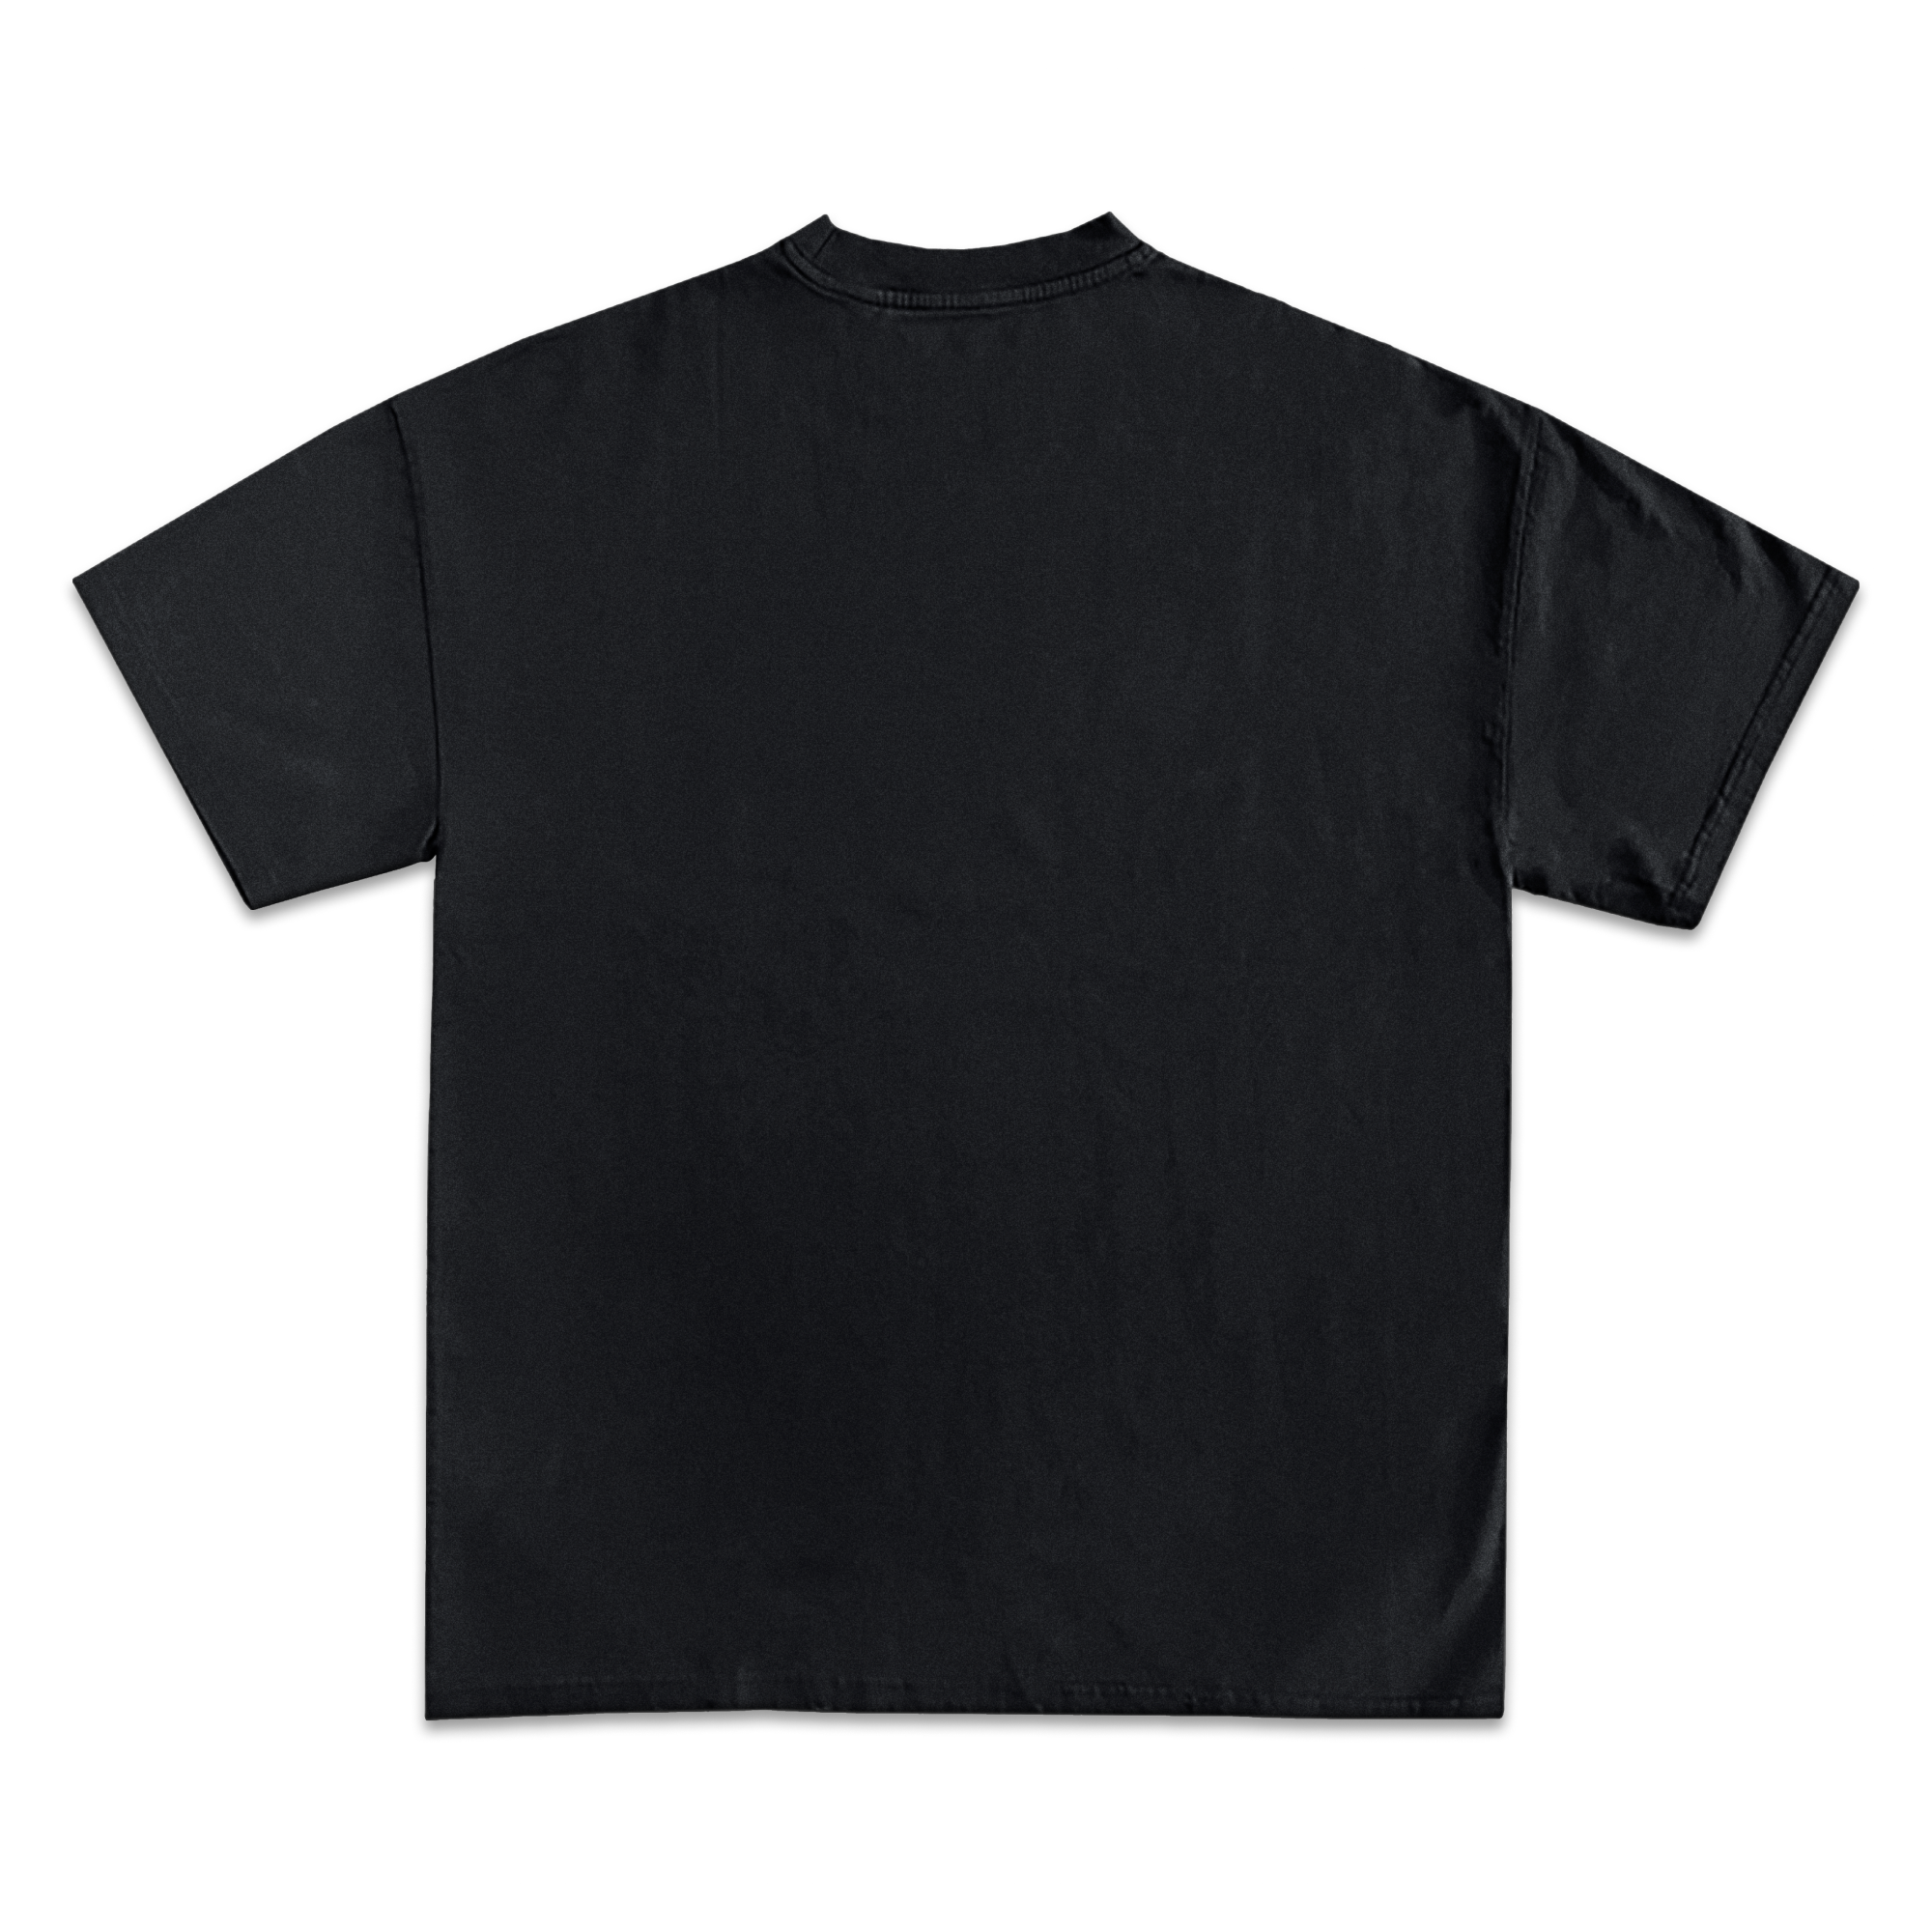 Drake Icy Exclusive Graphic T-Shirt